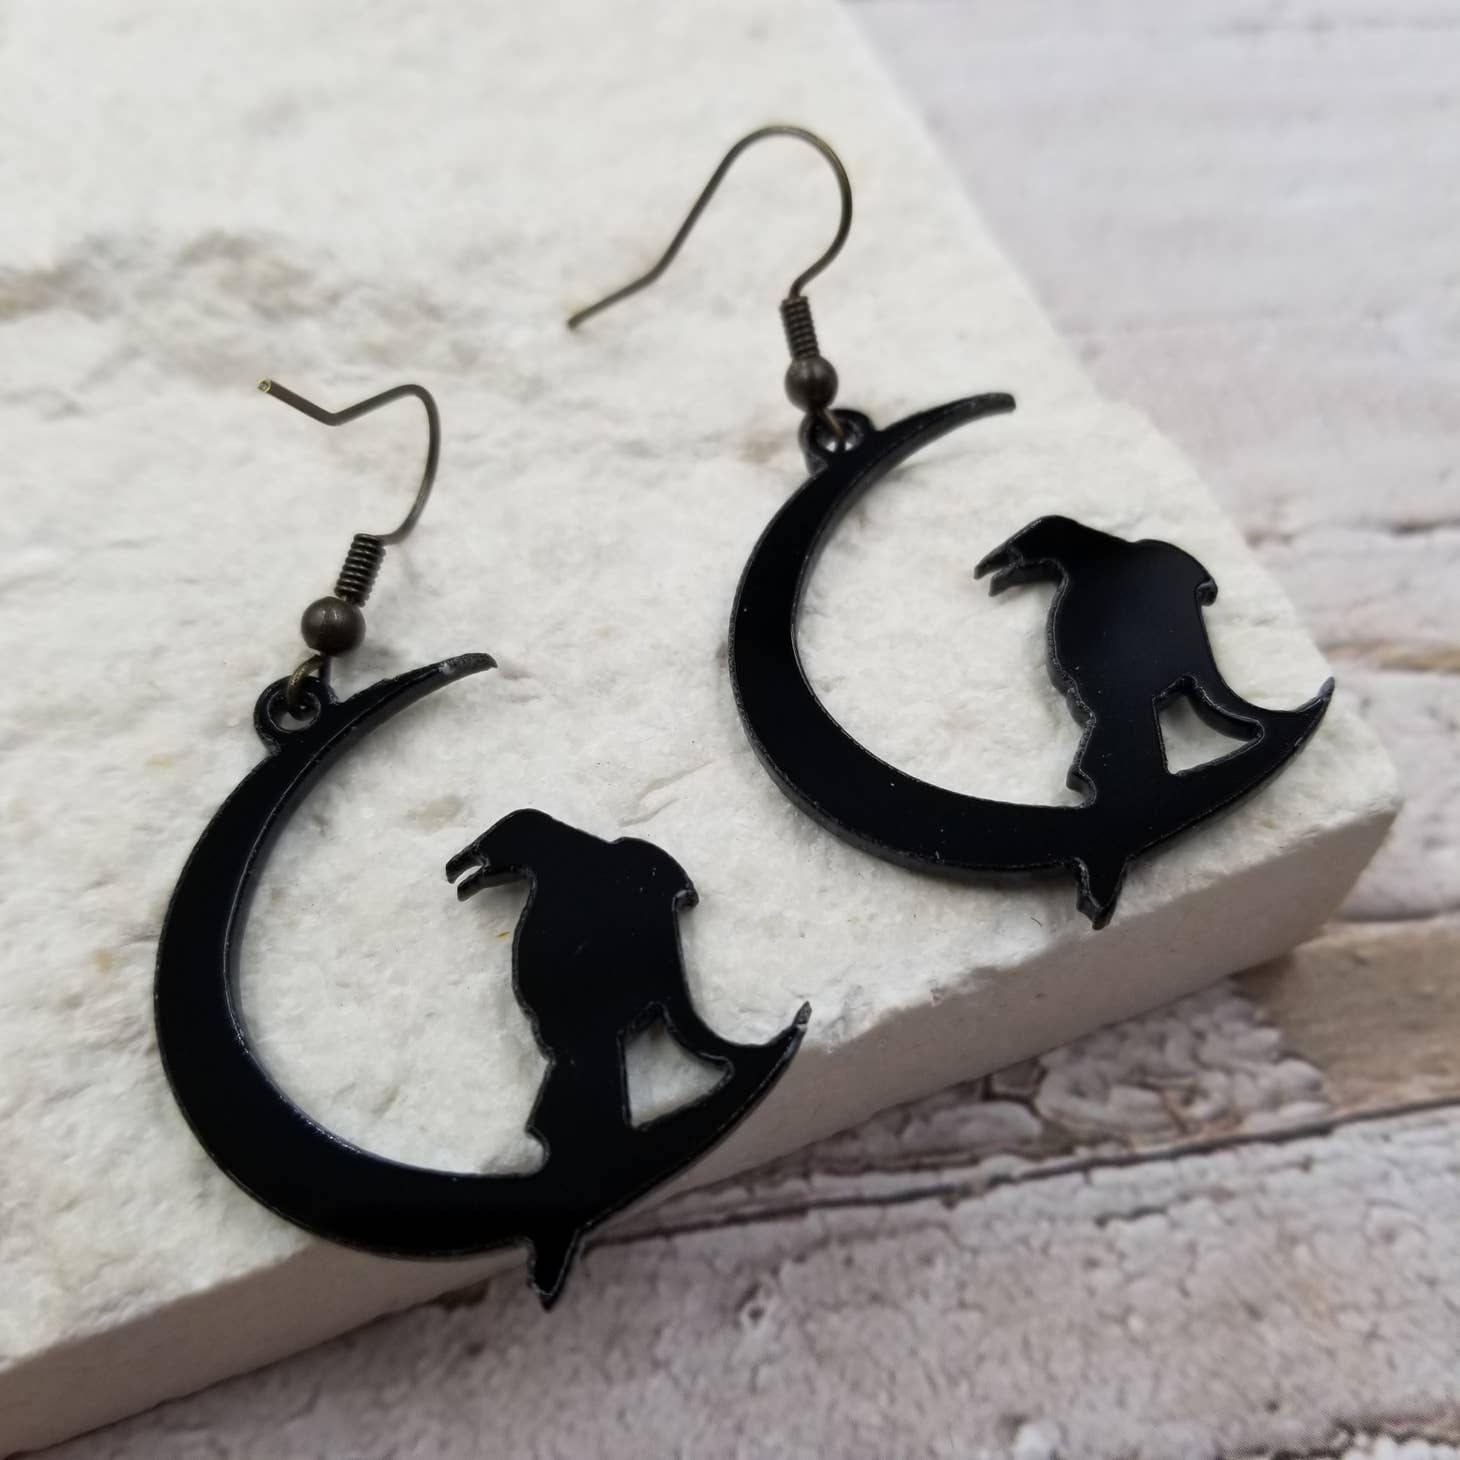 Laser cut acrylic dangle earrings in the shape of a crow perched on a crescent moon. Shown laying flat